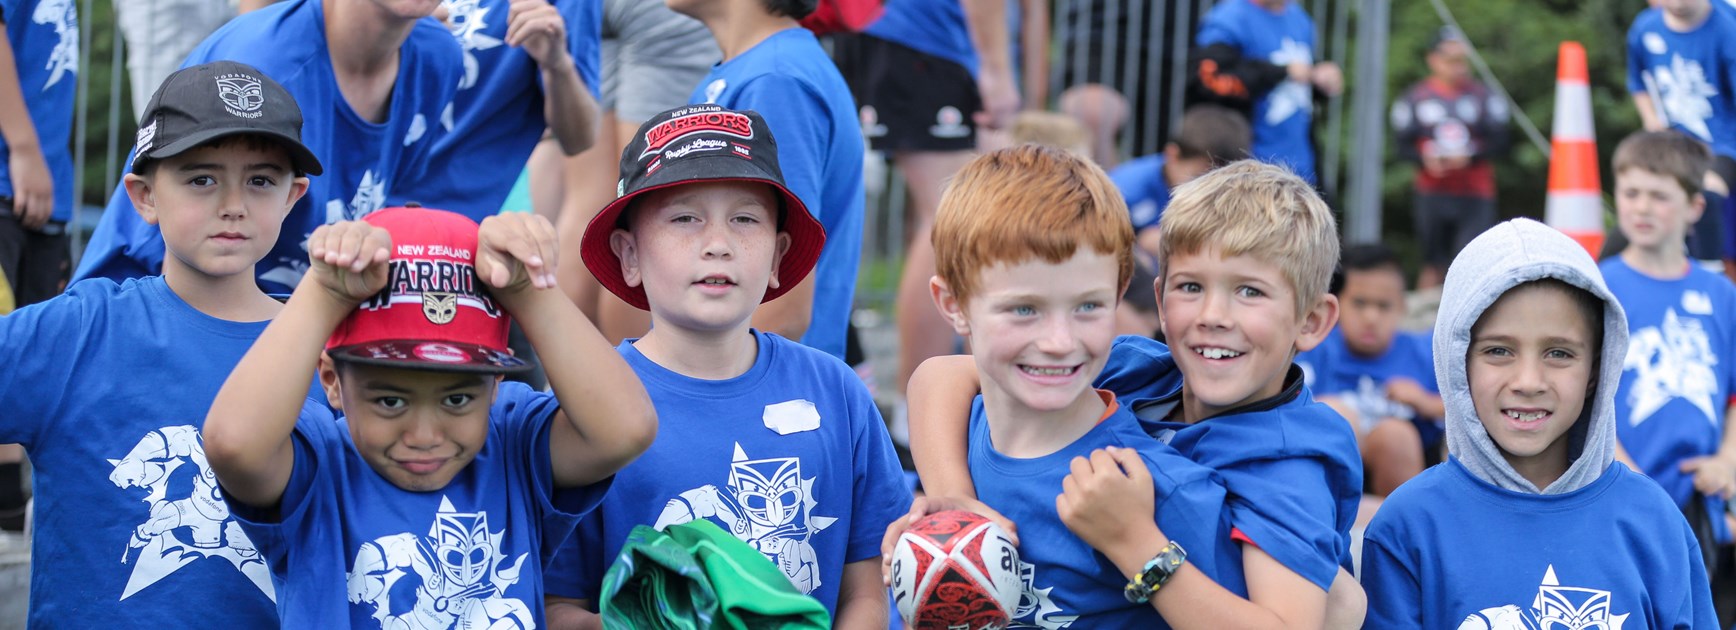 Sign up now for footy clinic fun